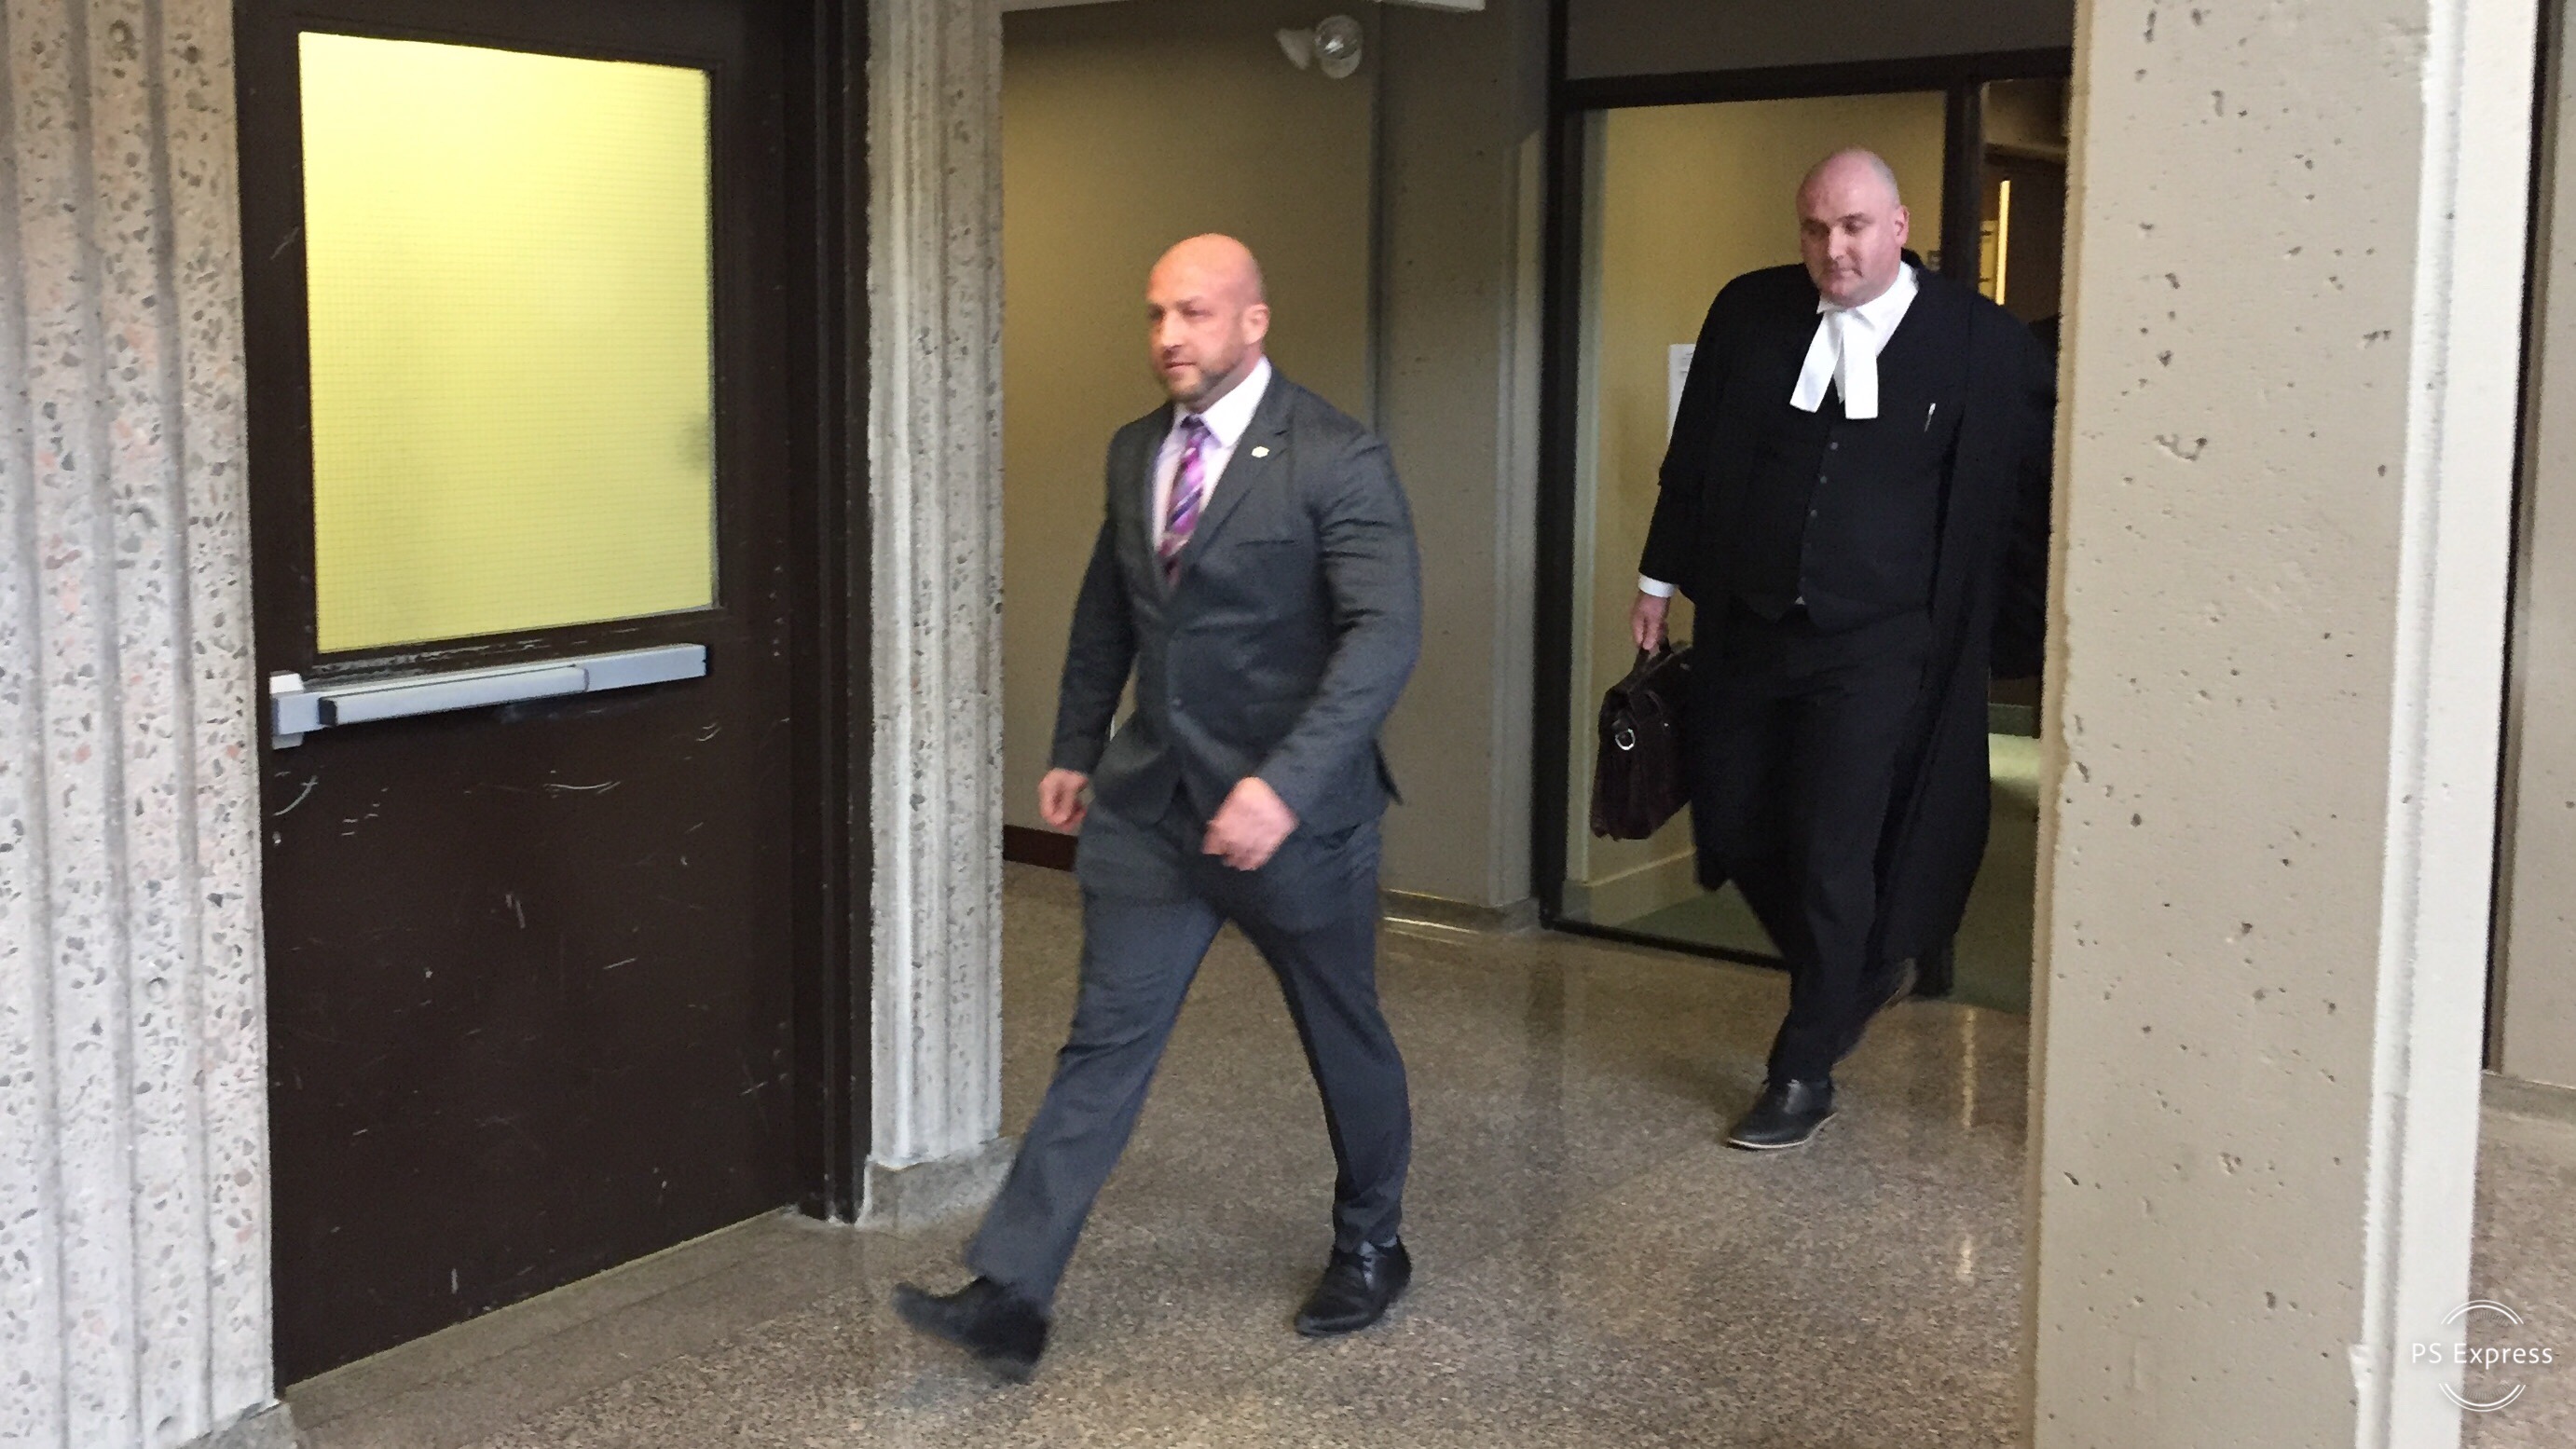 Darren Smalley (left) and his lawyer Ian Hutchison (right) leaving court after Smalley was found not guilty.